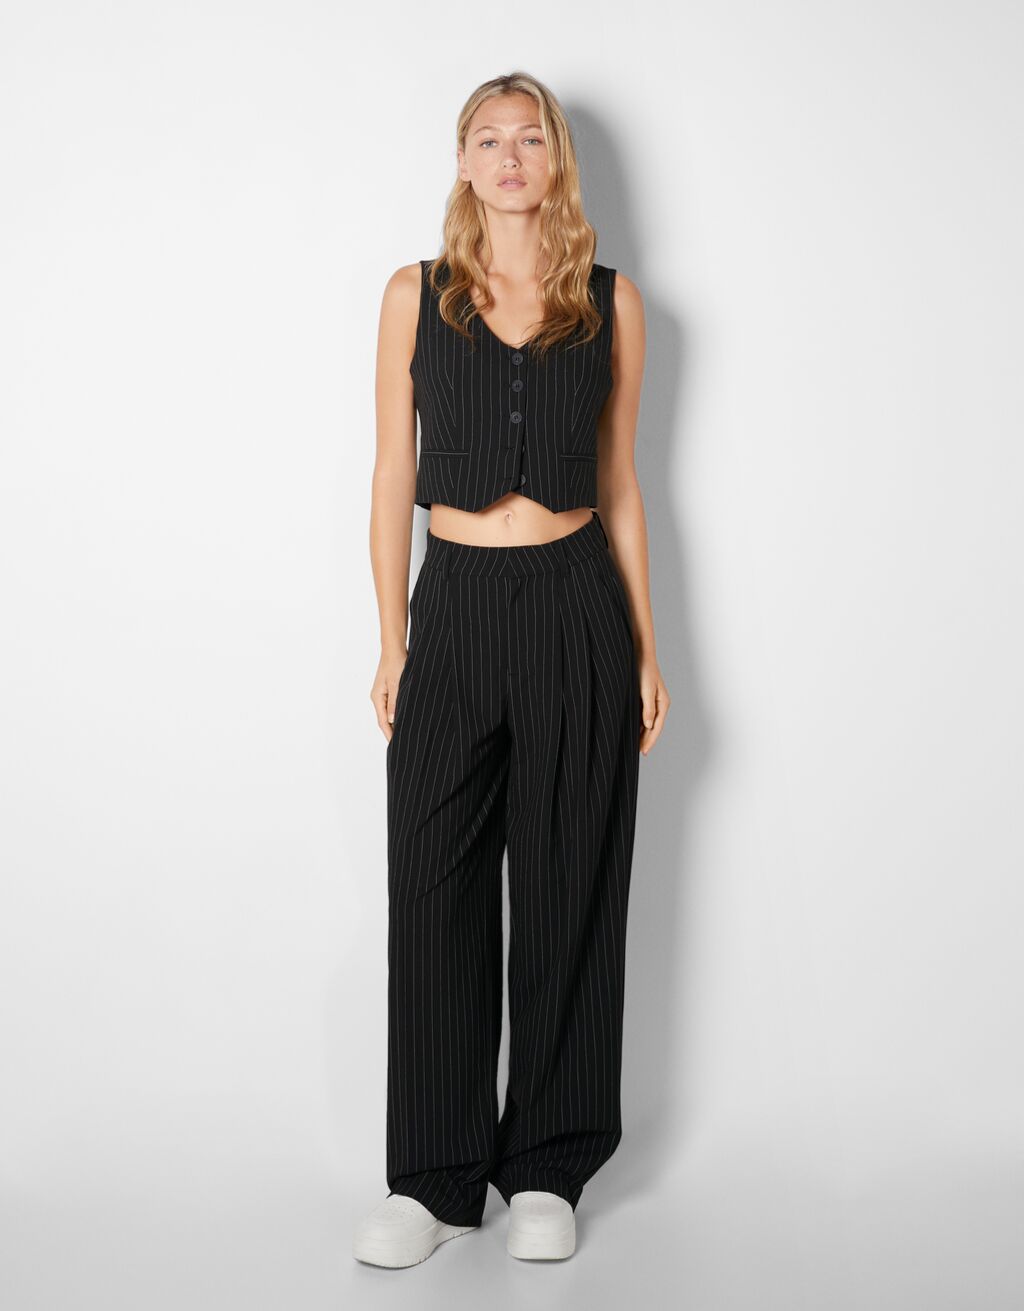 Pinstriped vest and pants set